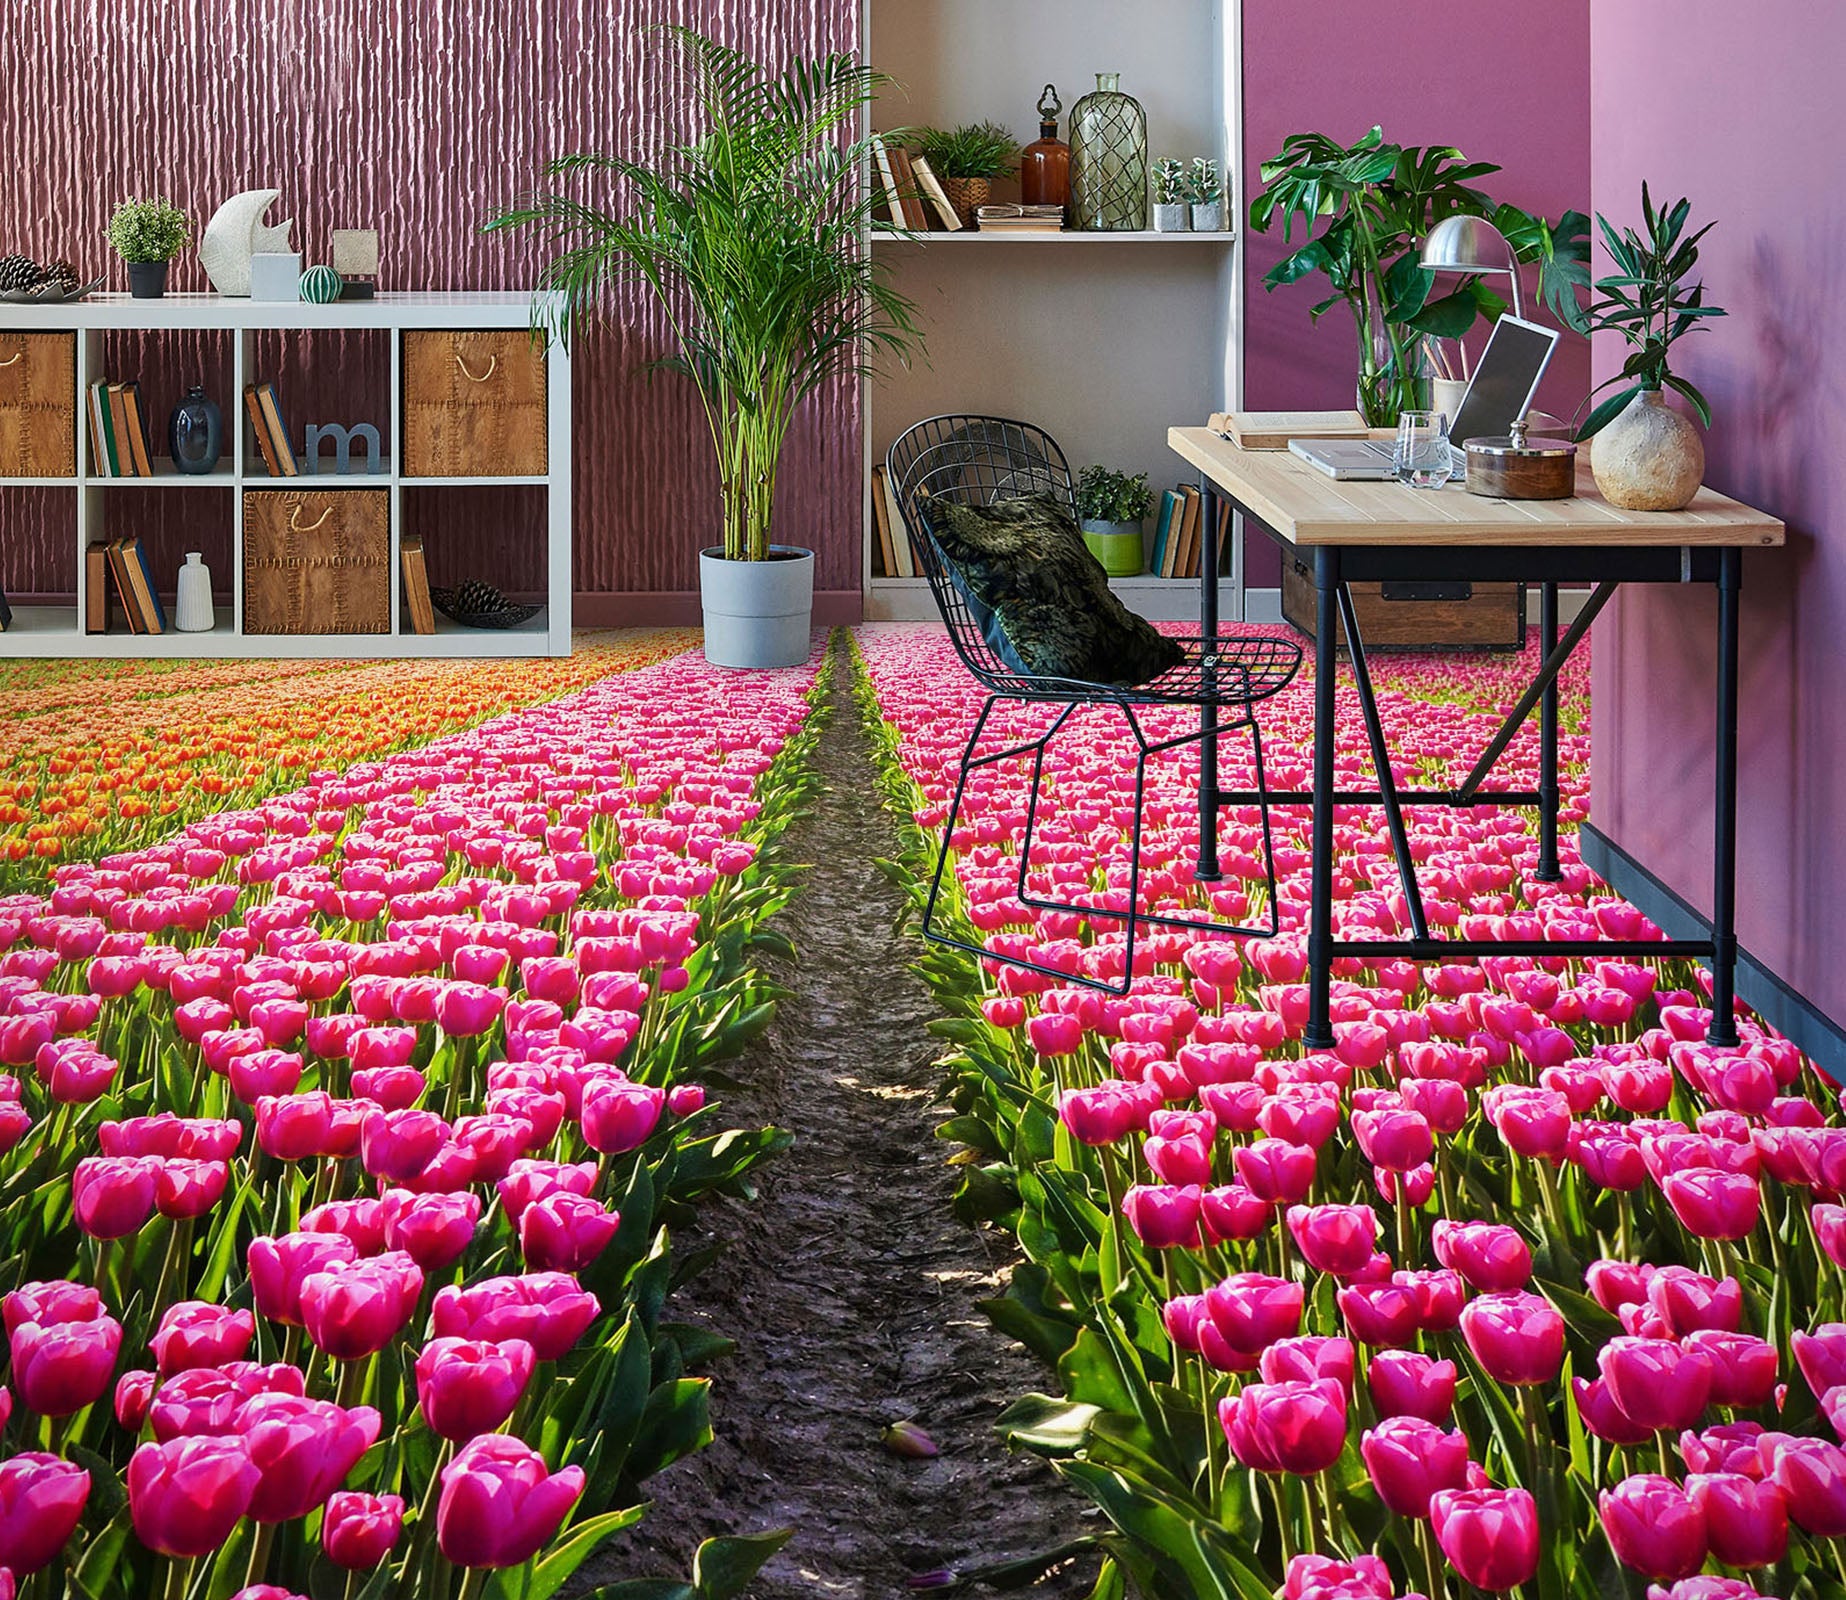 3D Full-bodied Tulips 1212 Floor Mural  Wallpaper Murals Self-Adhesive Removable Print Epoxy